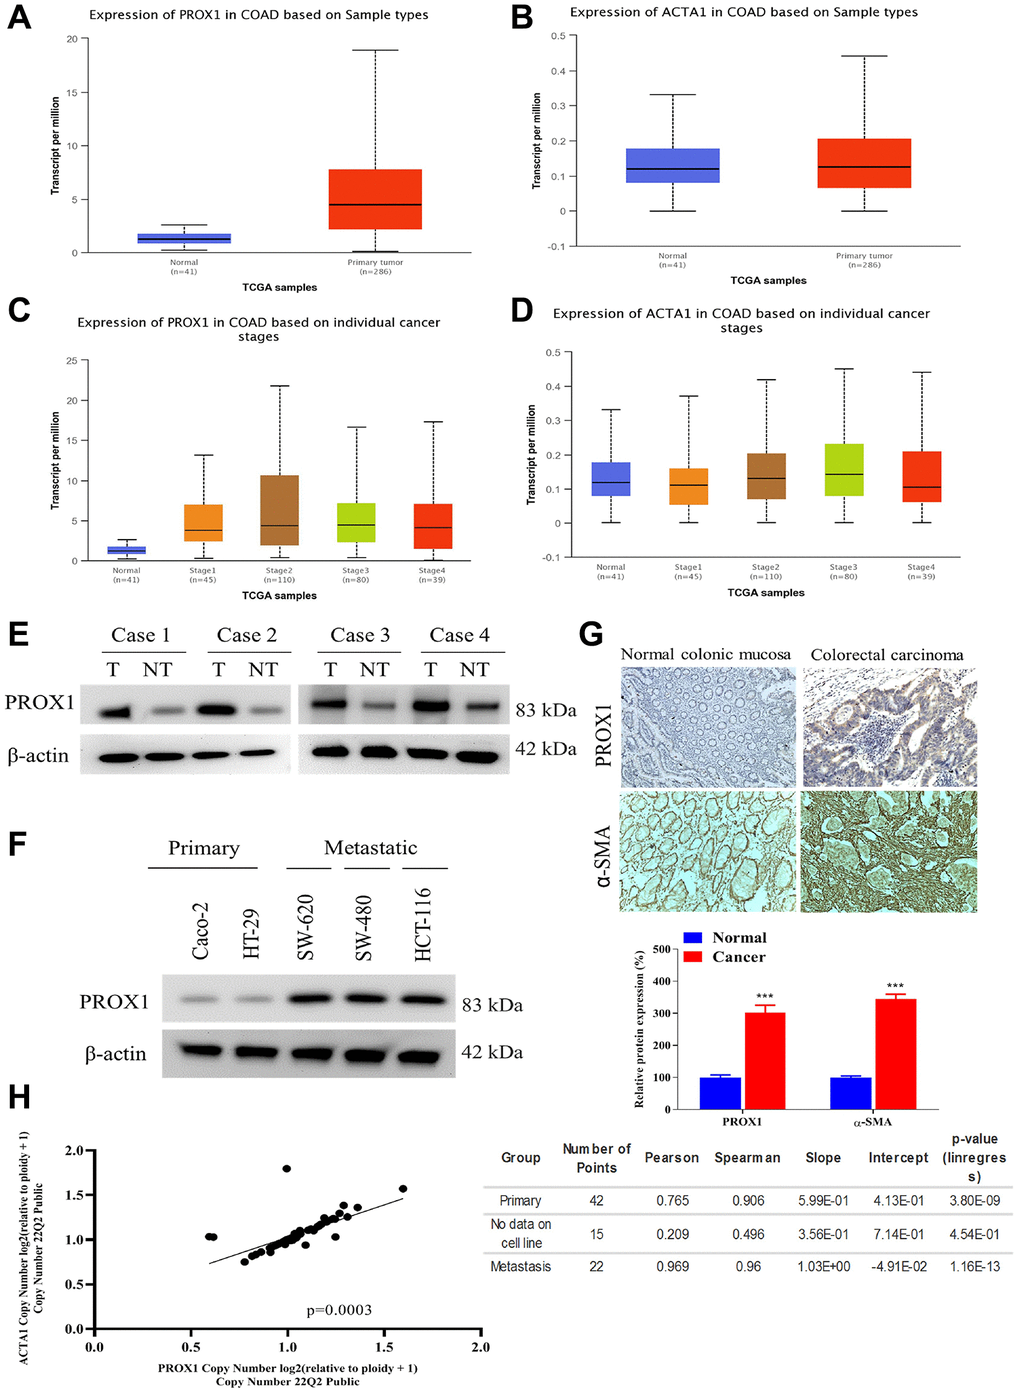 PROX1 and α-SMA overexpressed in CRC clinical samples and cell lines. (A, B) TCGA COAD dataset available from UALCAN shows, that PROX1 and α-SMA are upregulated in colorectal adenocarcinoma tissues. (C, D) PROX1 and α-SMA expression in COAD cases on the indivisible cancer stage from TCGA COAD dataset available from UALCAN. Western blot analysis of PROX1 expression in (E) paired tumor and non-tumor colorectal clinical samples and (F) human colorectal cancer cell lines, Caco-2, HT-29, SW-480, SW-620 and HCT116. β-actin is used as loading control; (G) Immunohistochemical analysis of PROX1 or α-SMA expression in normal colonic and colorectal tumor samples. (H) DepMap analysis of correlation expression of PROX1 and α-SMA.